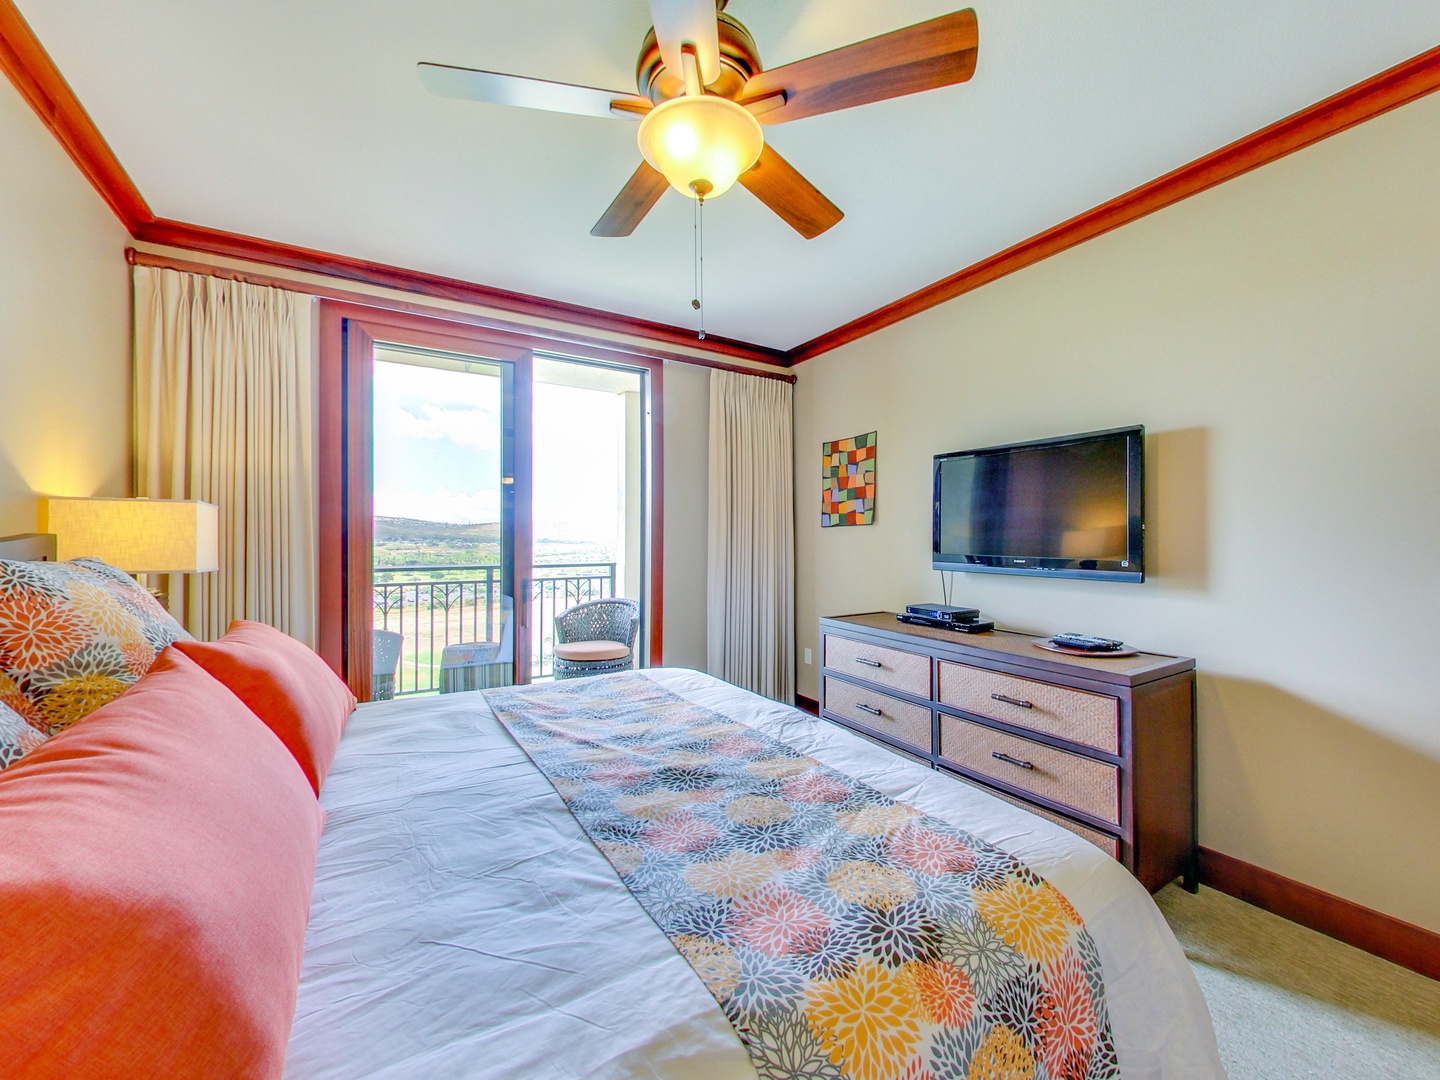 Kapolei Vacation Rentals, Ko Olina Beach Villas O1402 - Welcome to your bright and cheery primary guest bedroom with custom bedding and a TV.